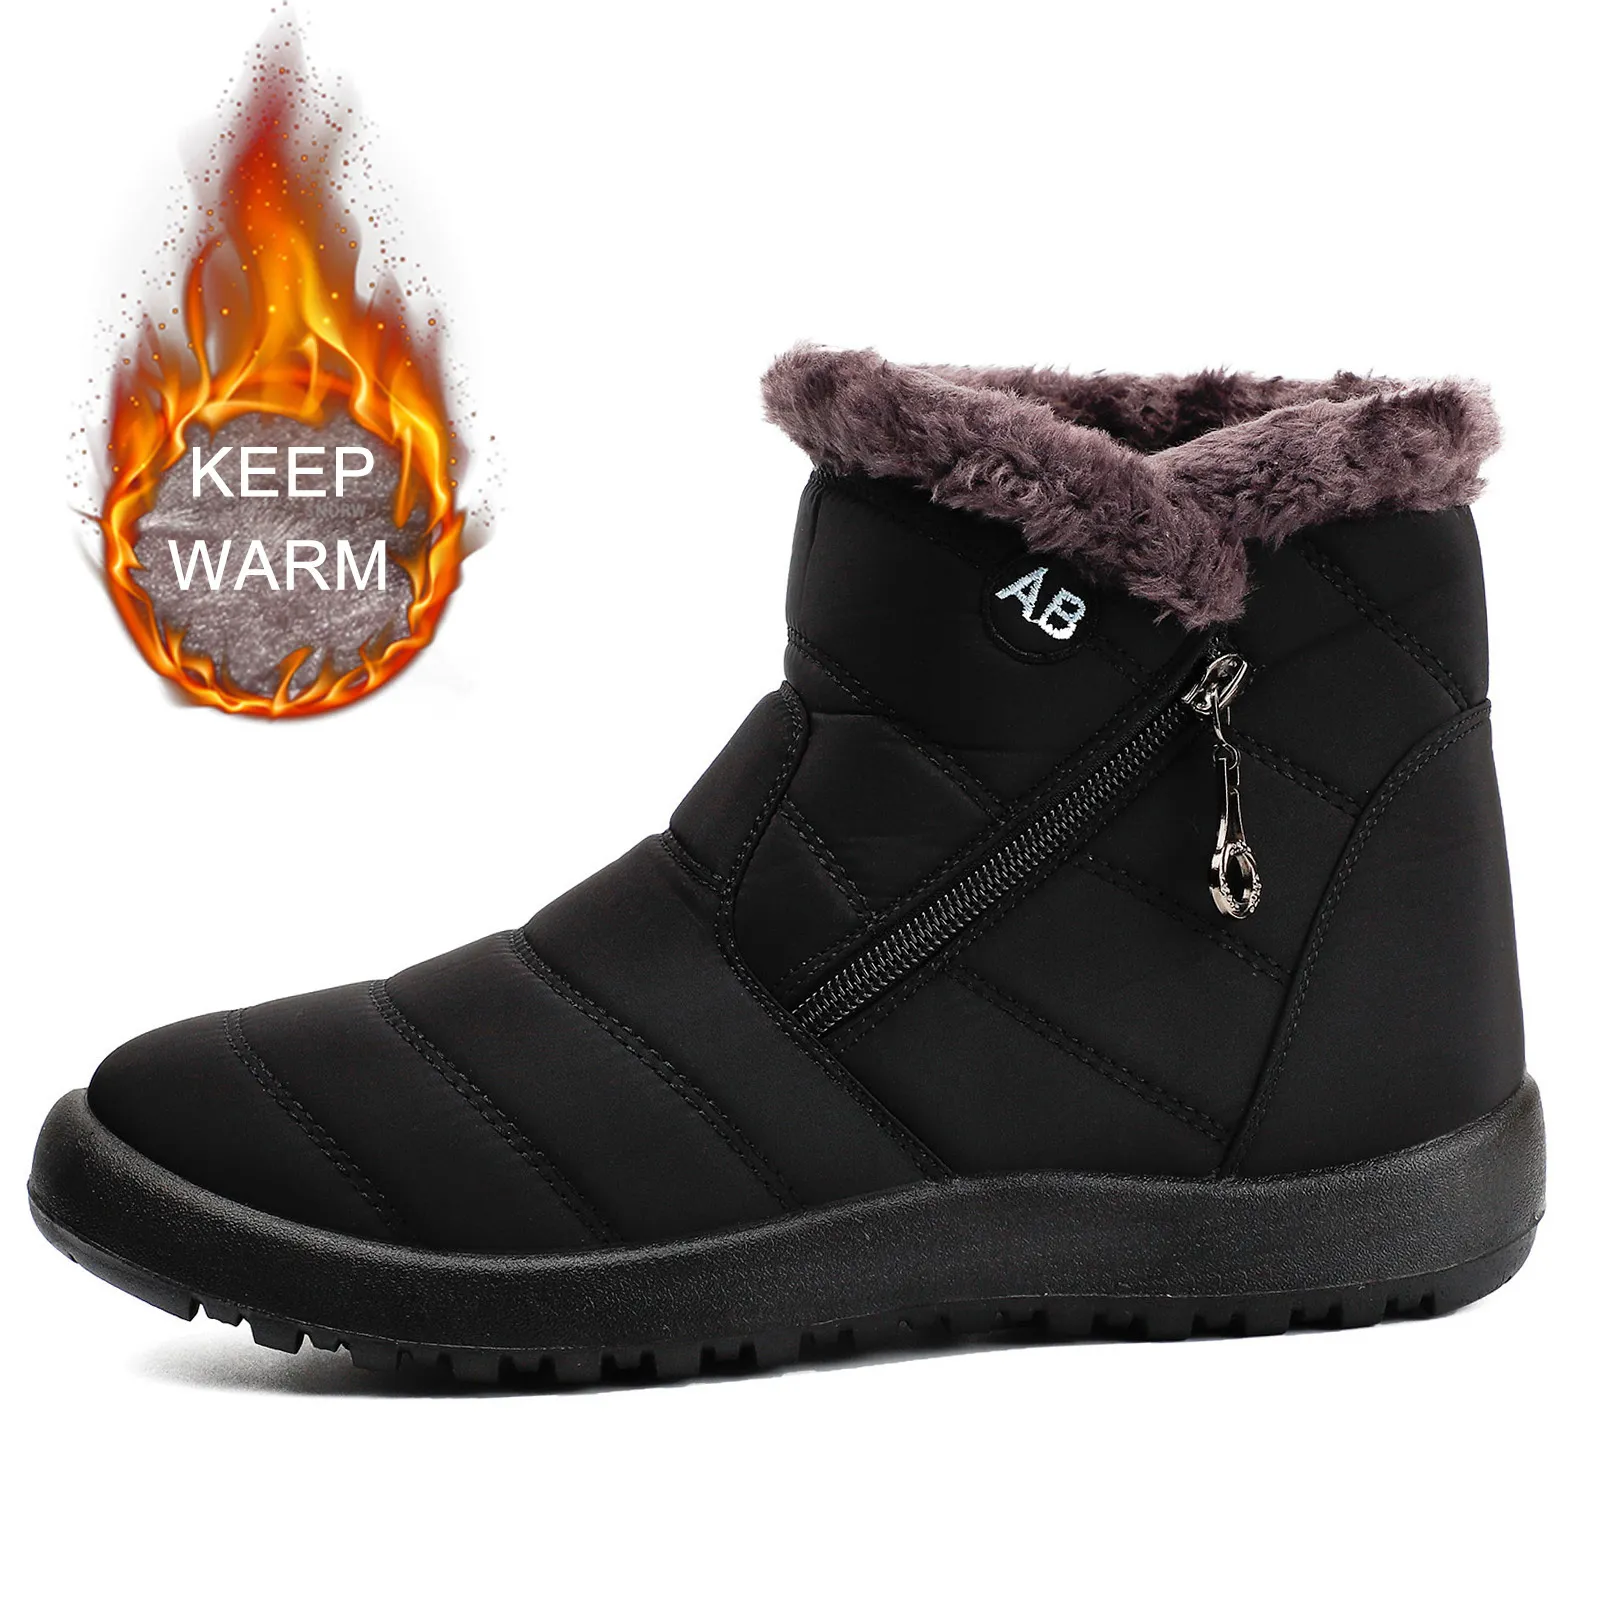 Boot Watarproof Ankle For Winter Shoes Keep Warm Snow Female Zipper Botines Botas Mujer 230921